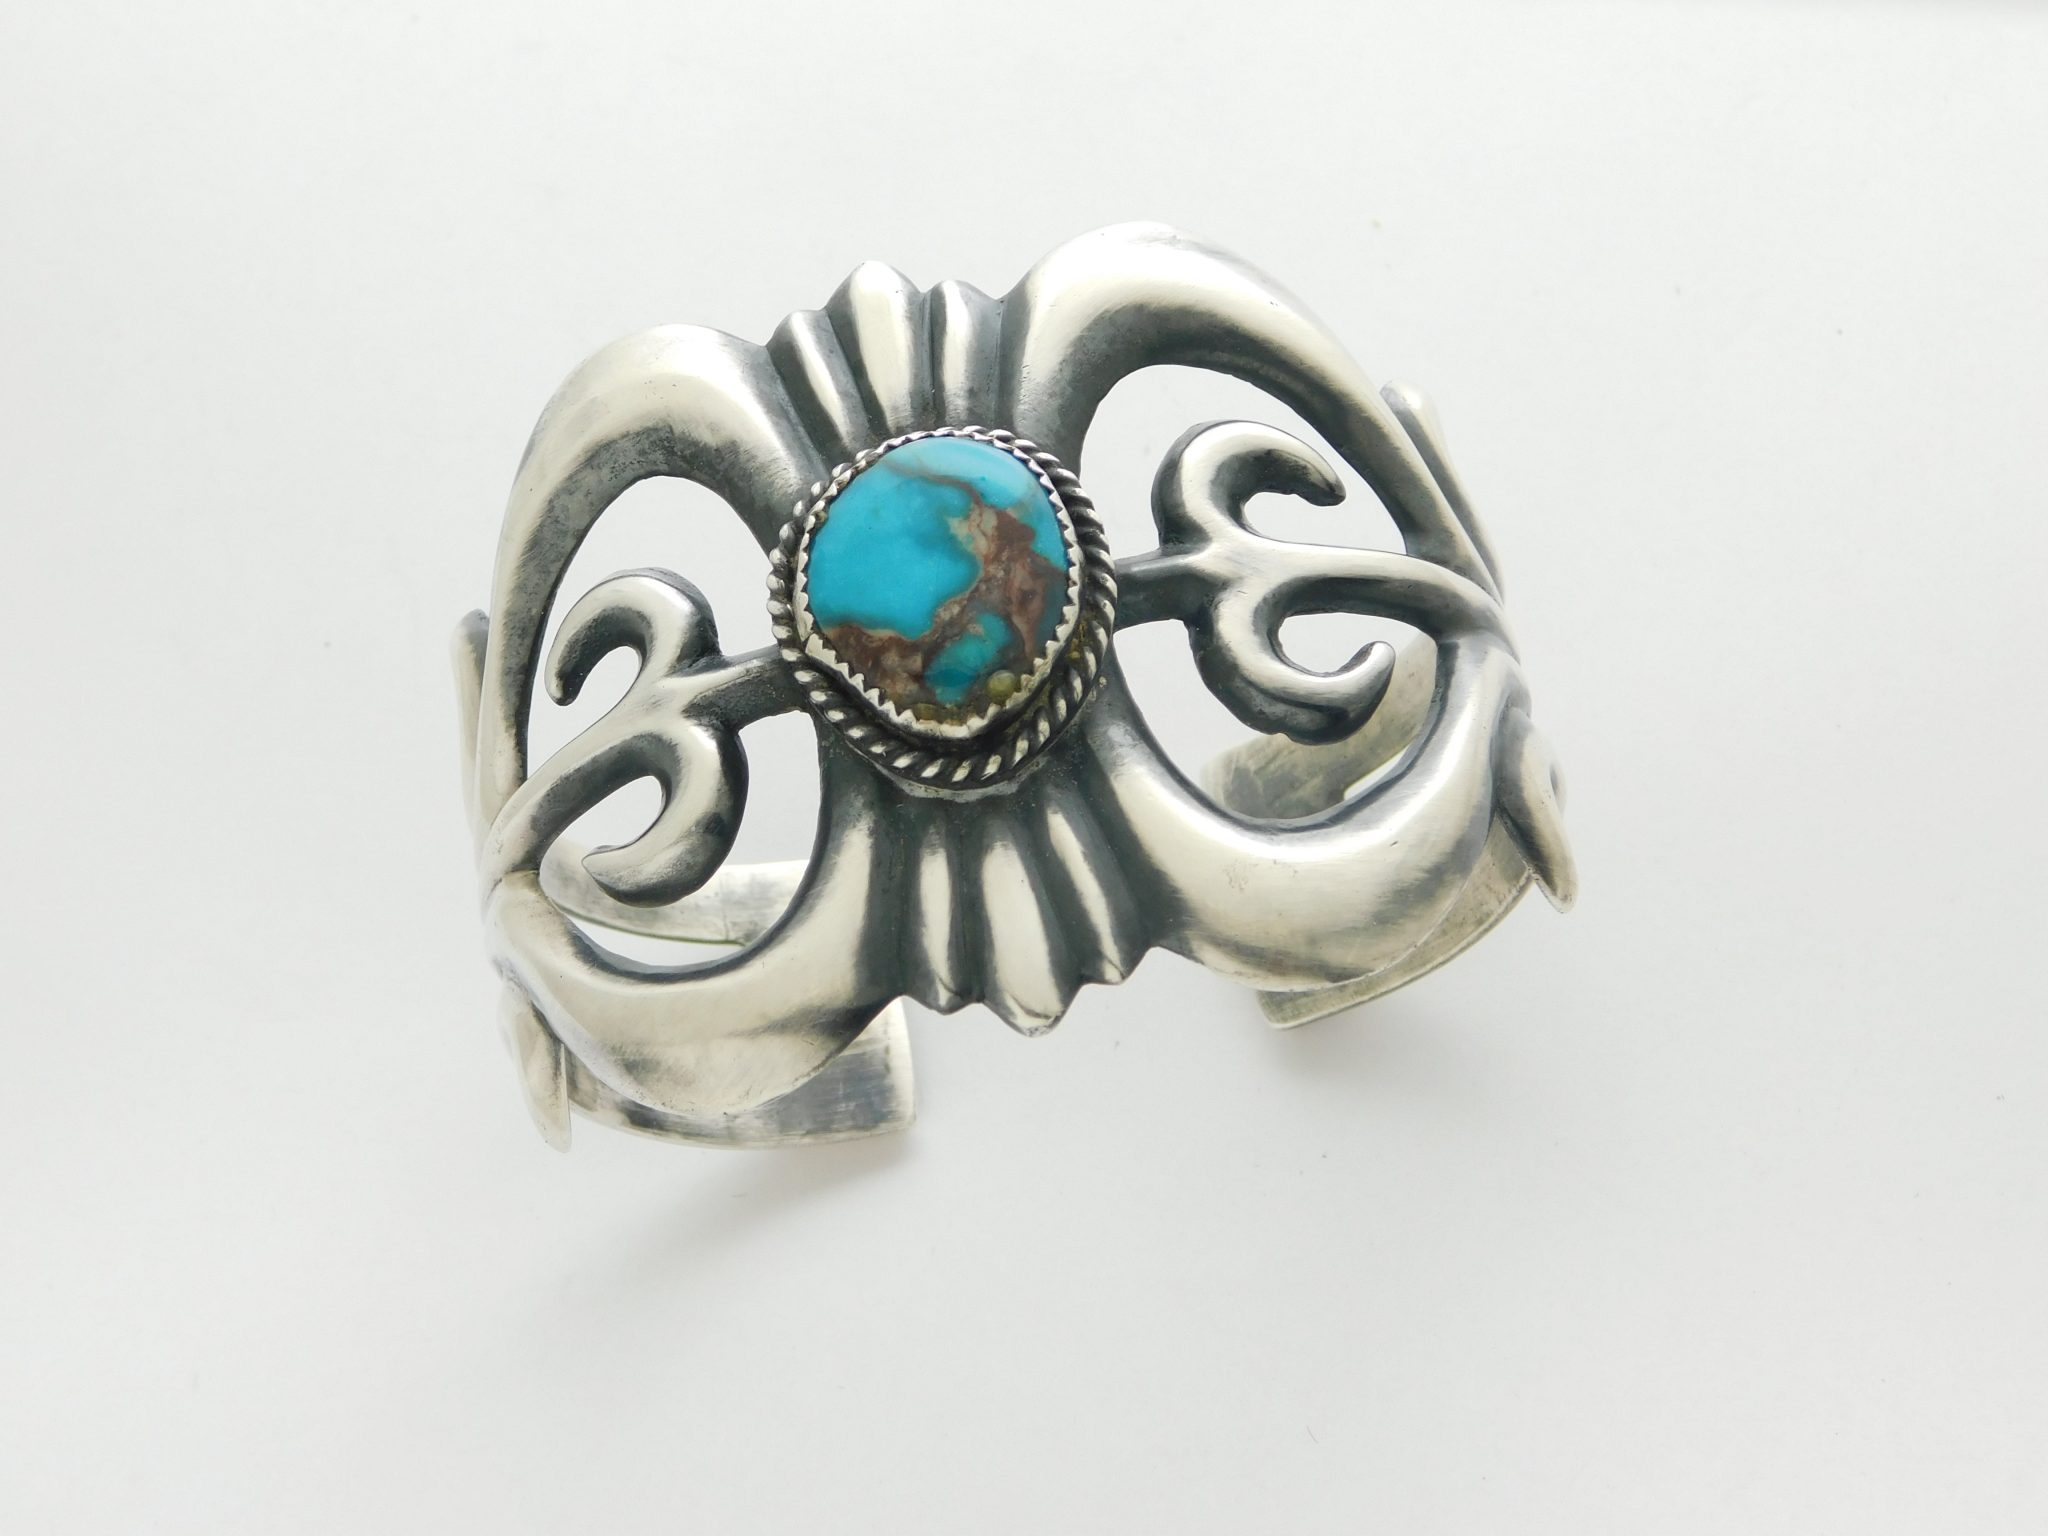 Navajo Sandcast Silver Buttons with Turquoise Centers and Copper